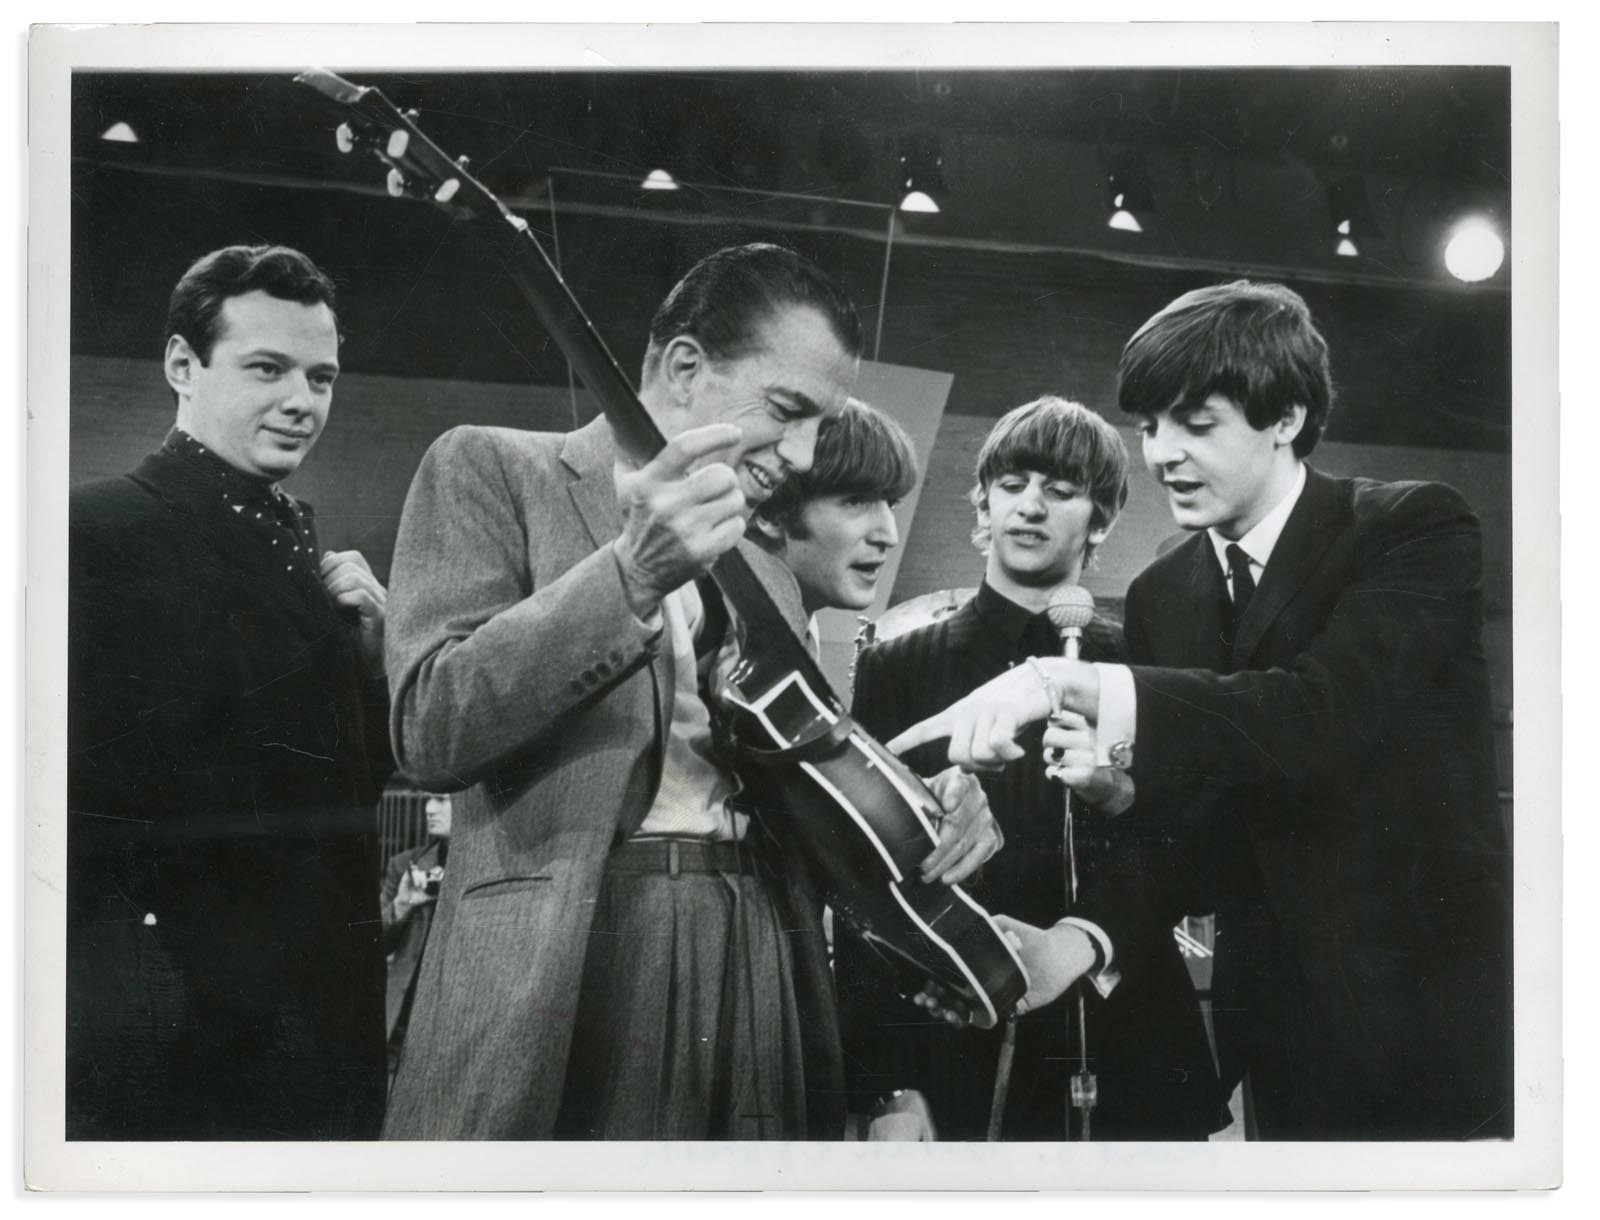 - 1964 The Beatles Historic First Ed Sullivan Show Performance Wire Photo